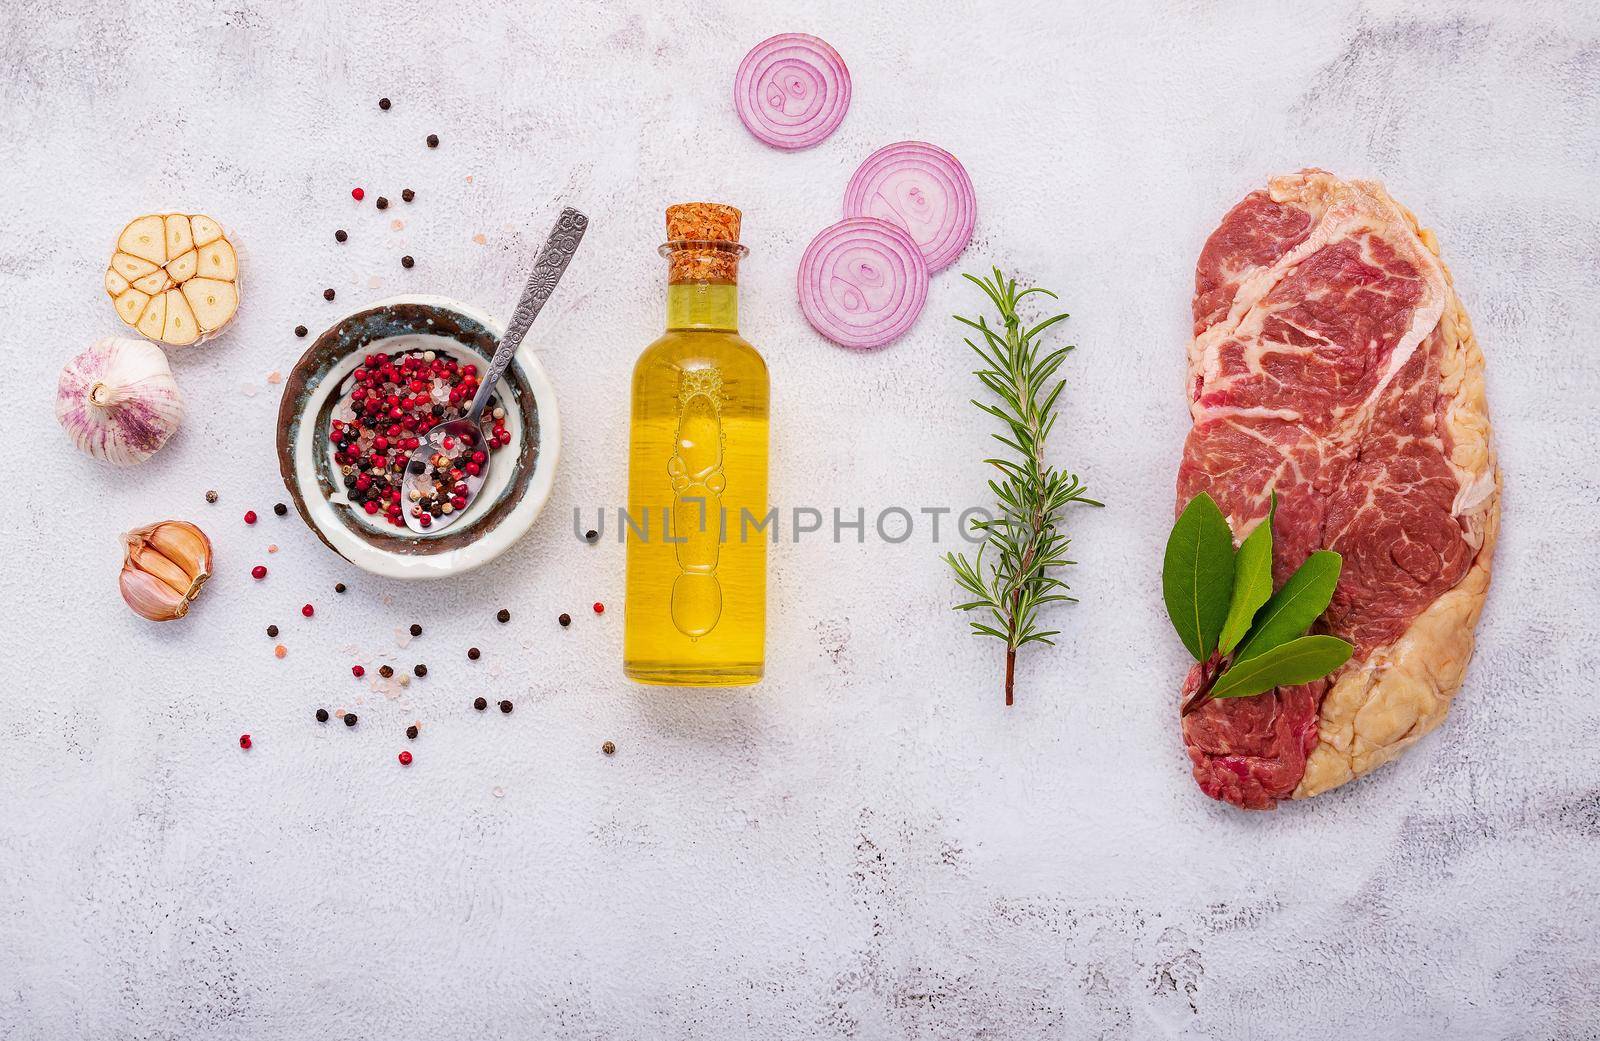 


Raw Striplion Steak set up on white concrete background. Flat Lay of fresh raw beef steak with rosemary and spice on white shabby concrete background top view.
 by kerdkanno